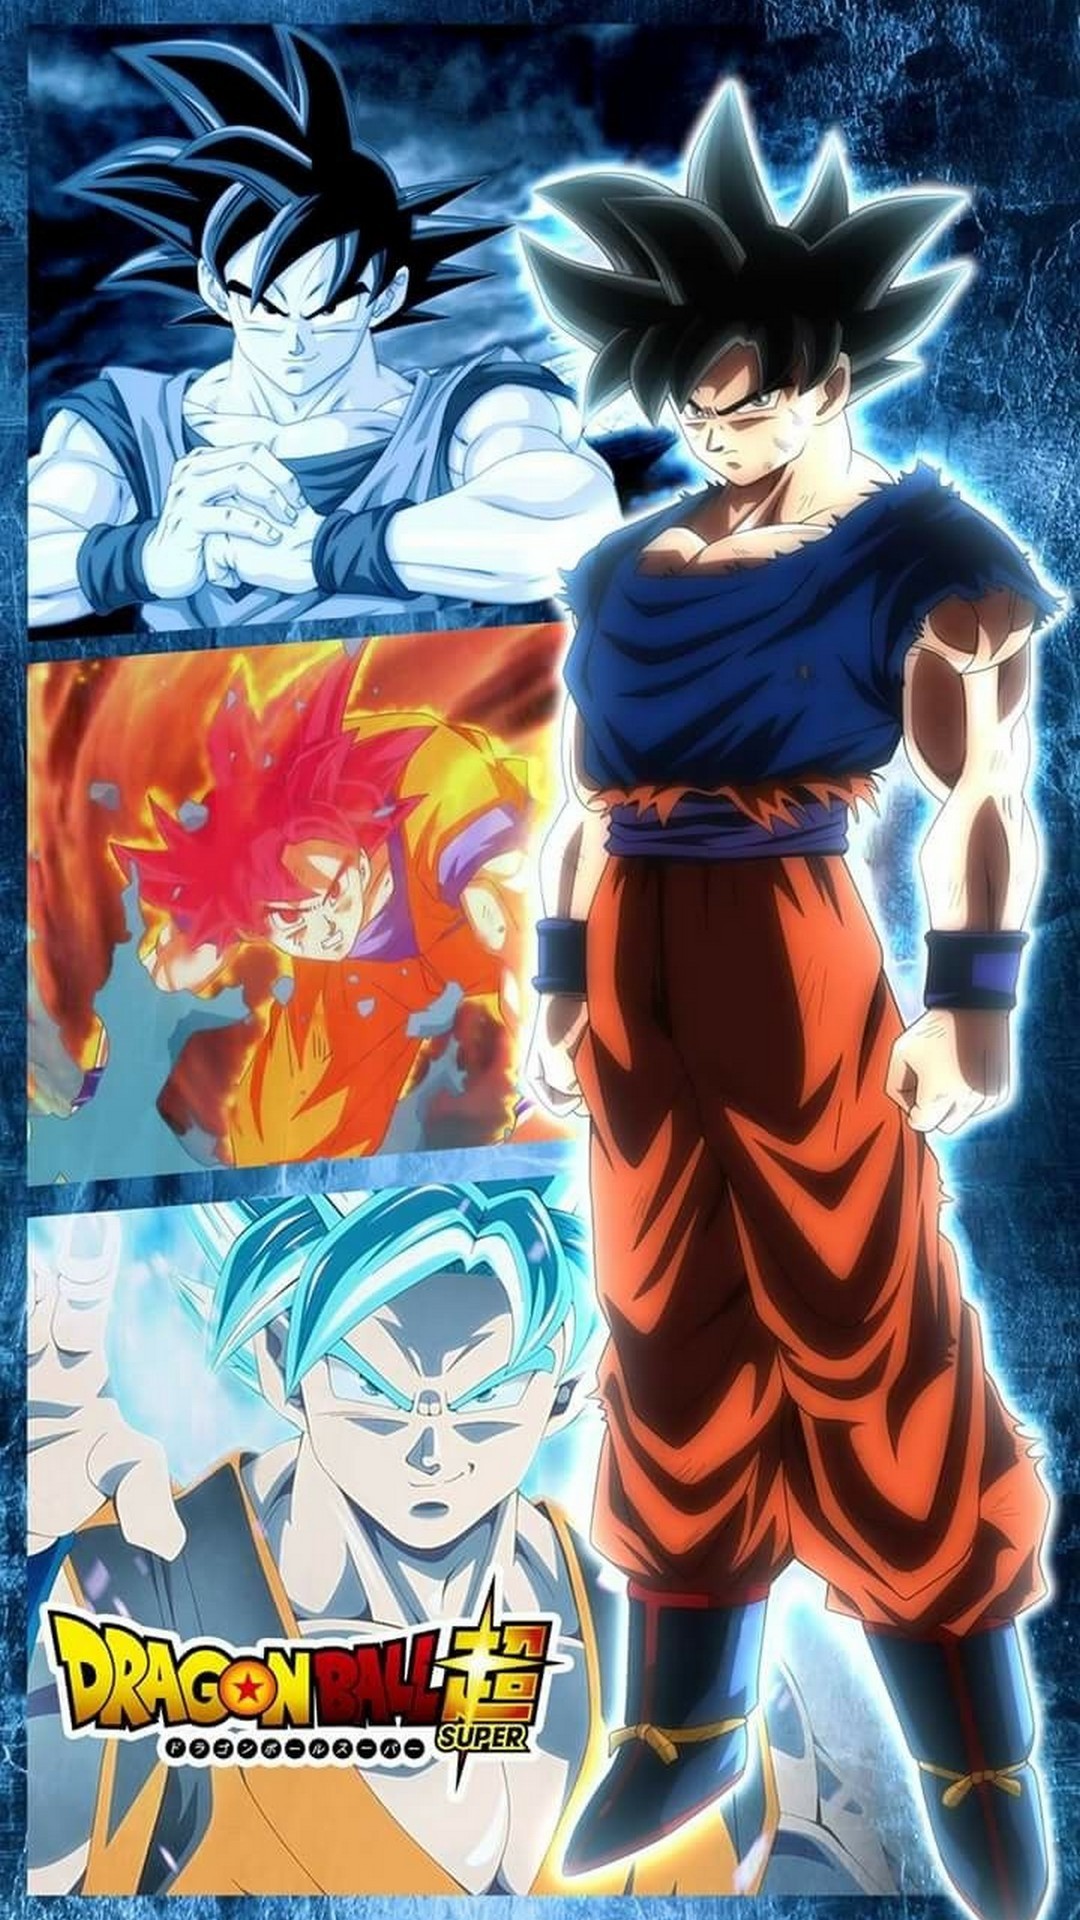 iPhone 8 Wallpaper Goku Imagenes with resolution 1080X1920 pixel. You can make this wallpaper for your iPhone 5, 6, 7, 8, X backgrounds, Mobile Screensaver, or iPad Lock Screen